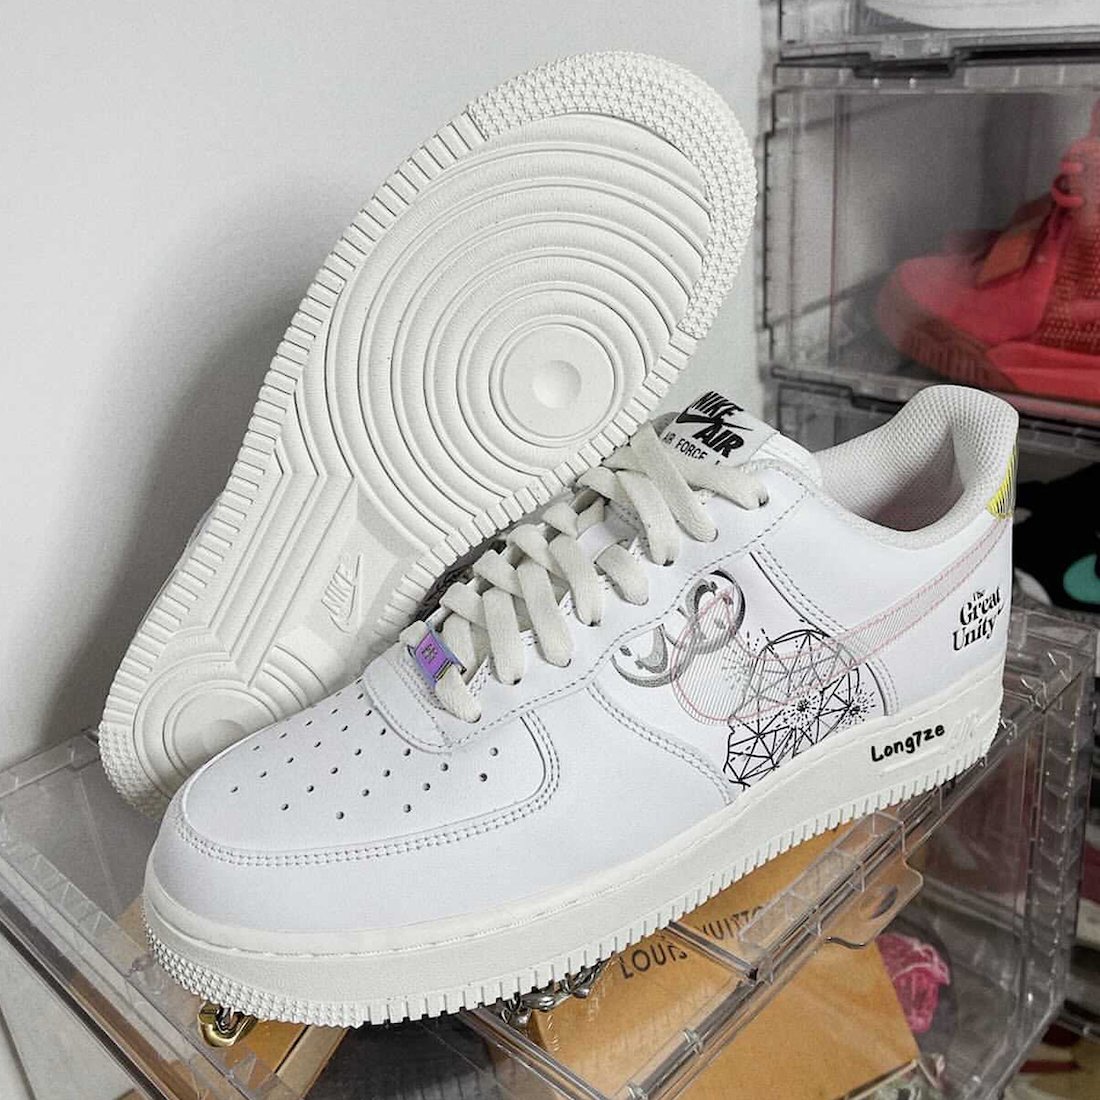 Nike Air Force 1 Low The Great Unity Release Date Info